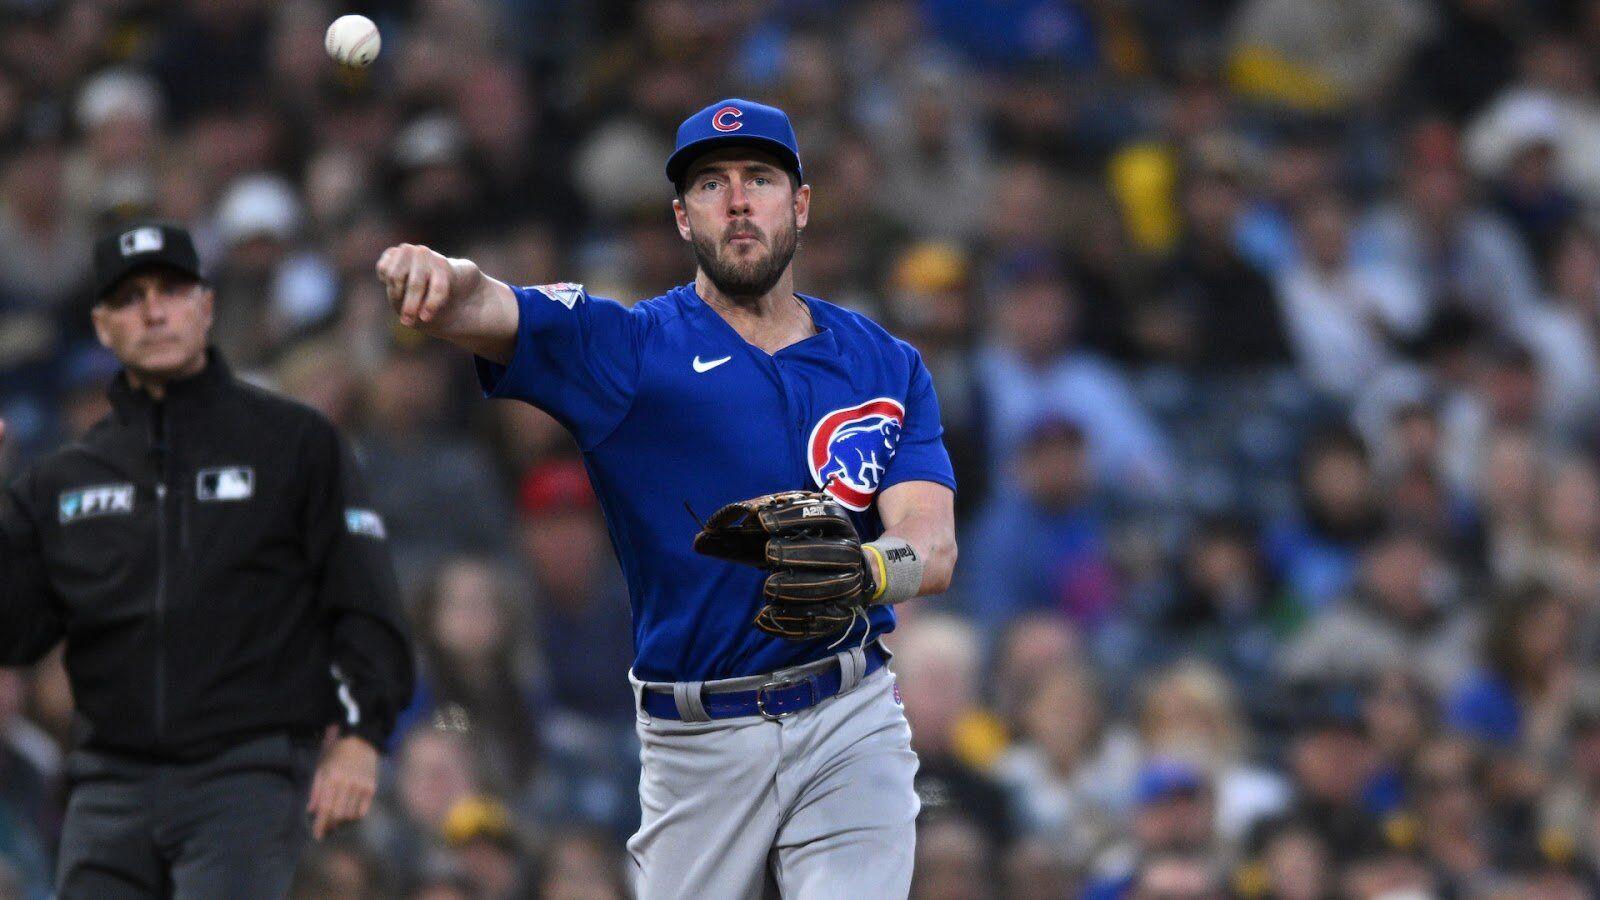 Seiya Suzuki robs first homer, Dansby Swanson hits two to power Cubs past  White Sox